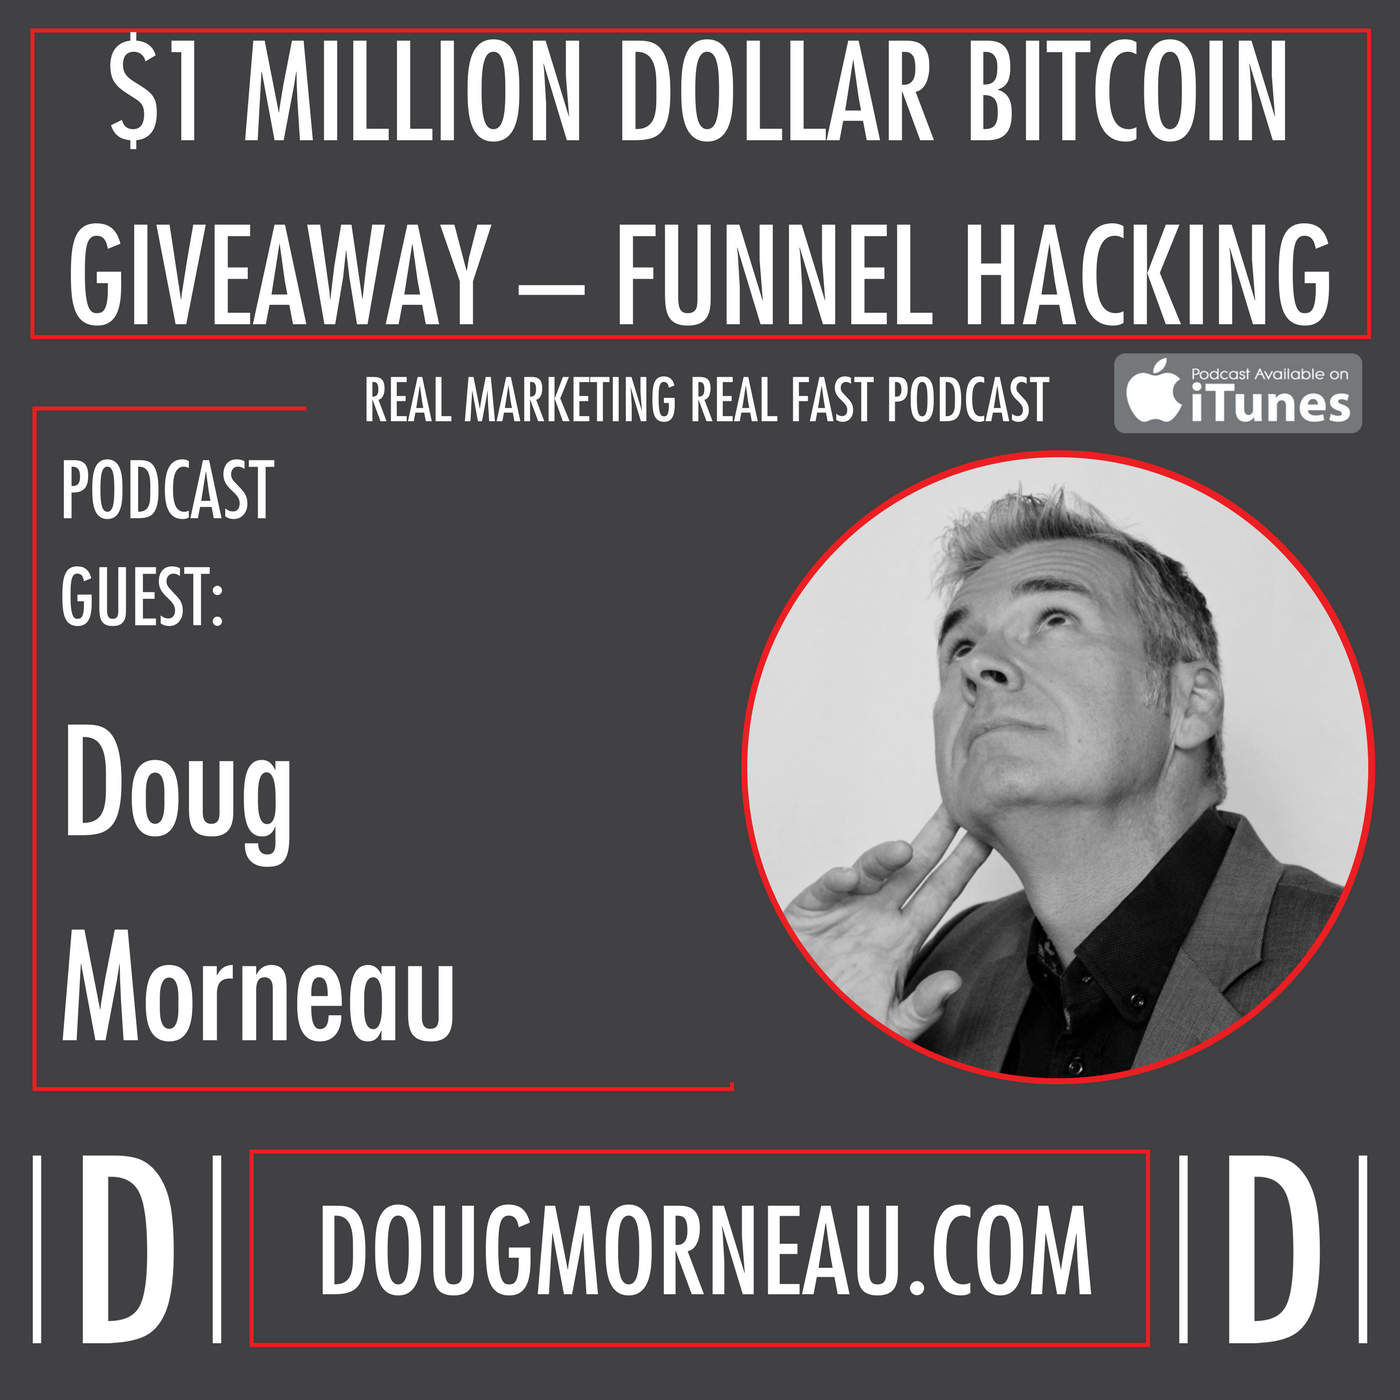 DOUG MORNEAU - $1 MILLION DOLLAR BITCOIN GIVEAWAY - REAL MARKETING REAL FAST PODCAST